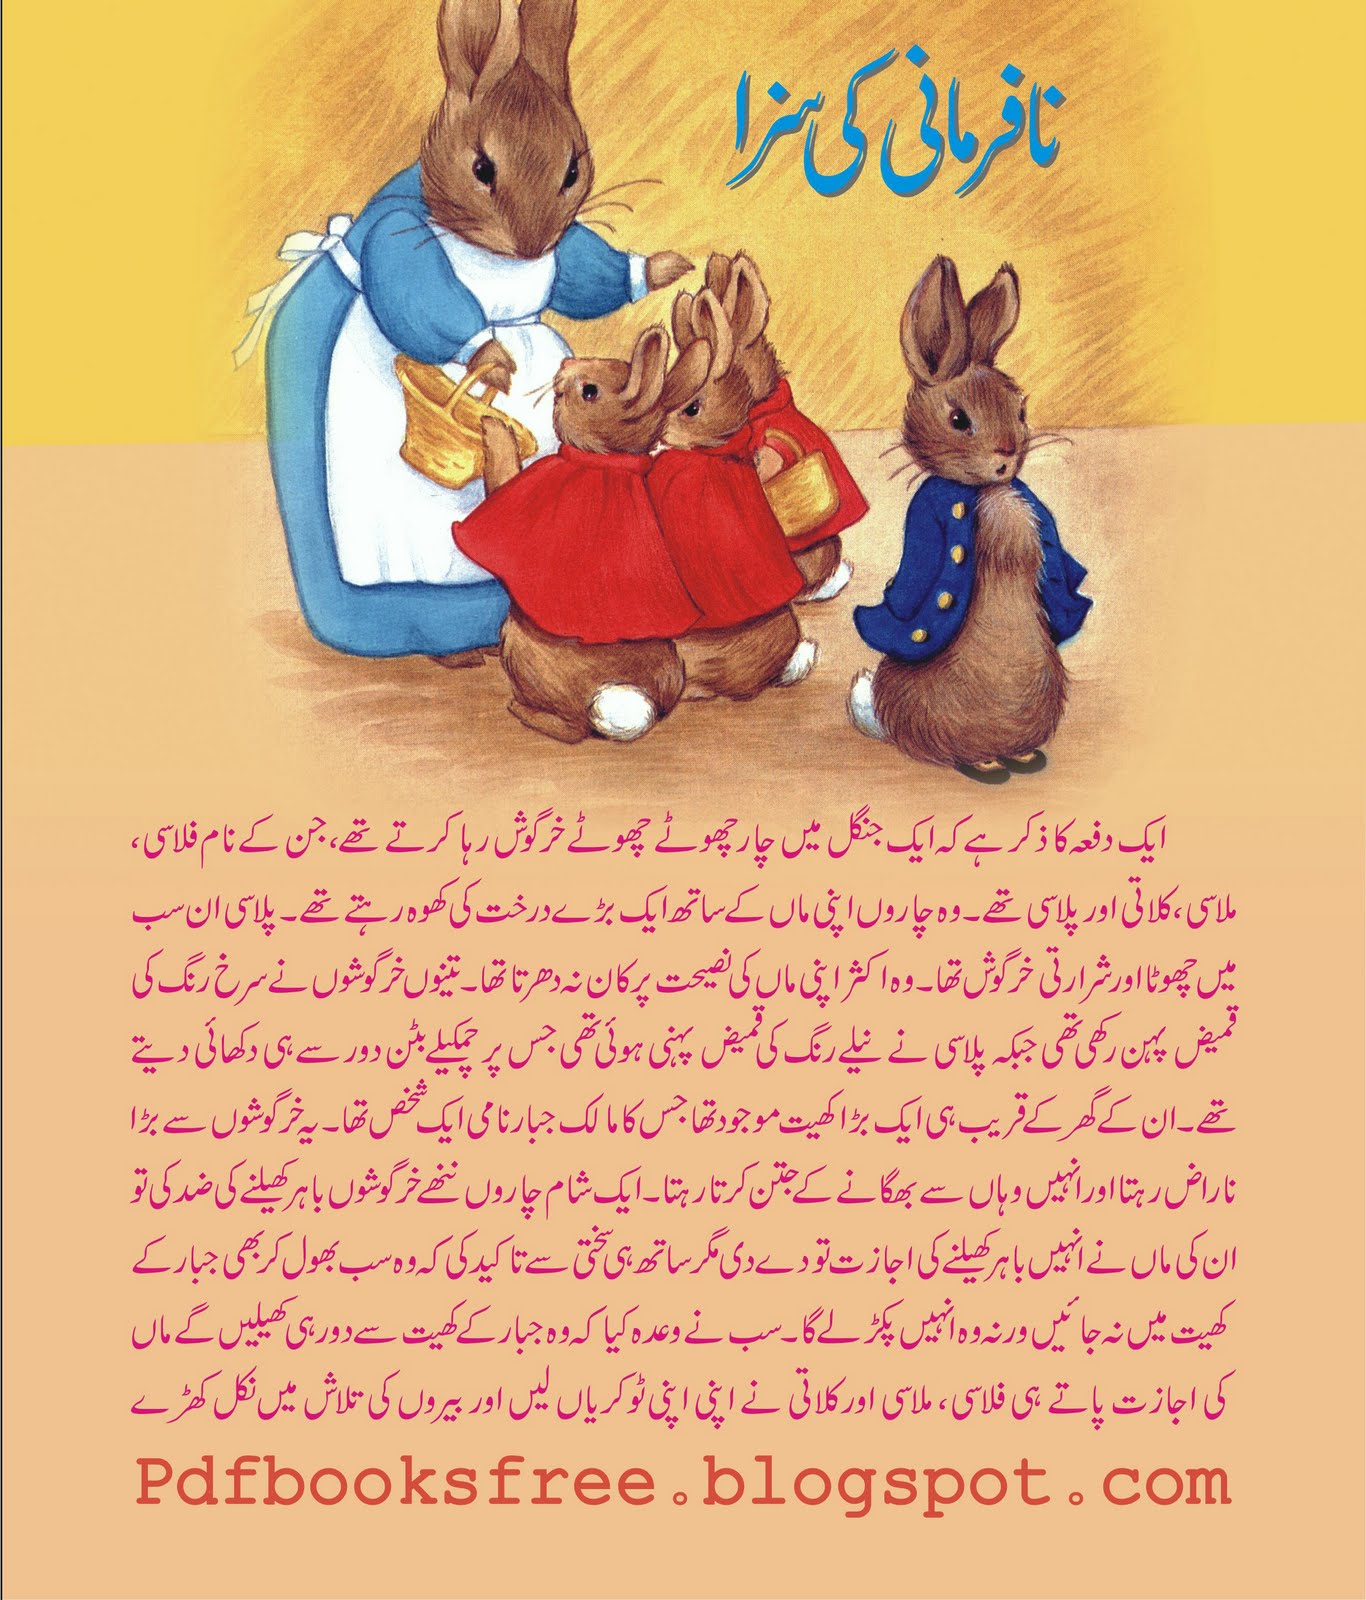 Moazzam Javed Bukhari. This is a Kids learning story book in Urdu pdf